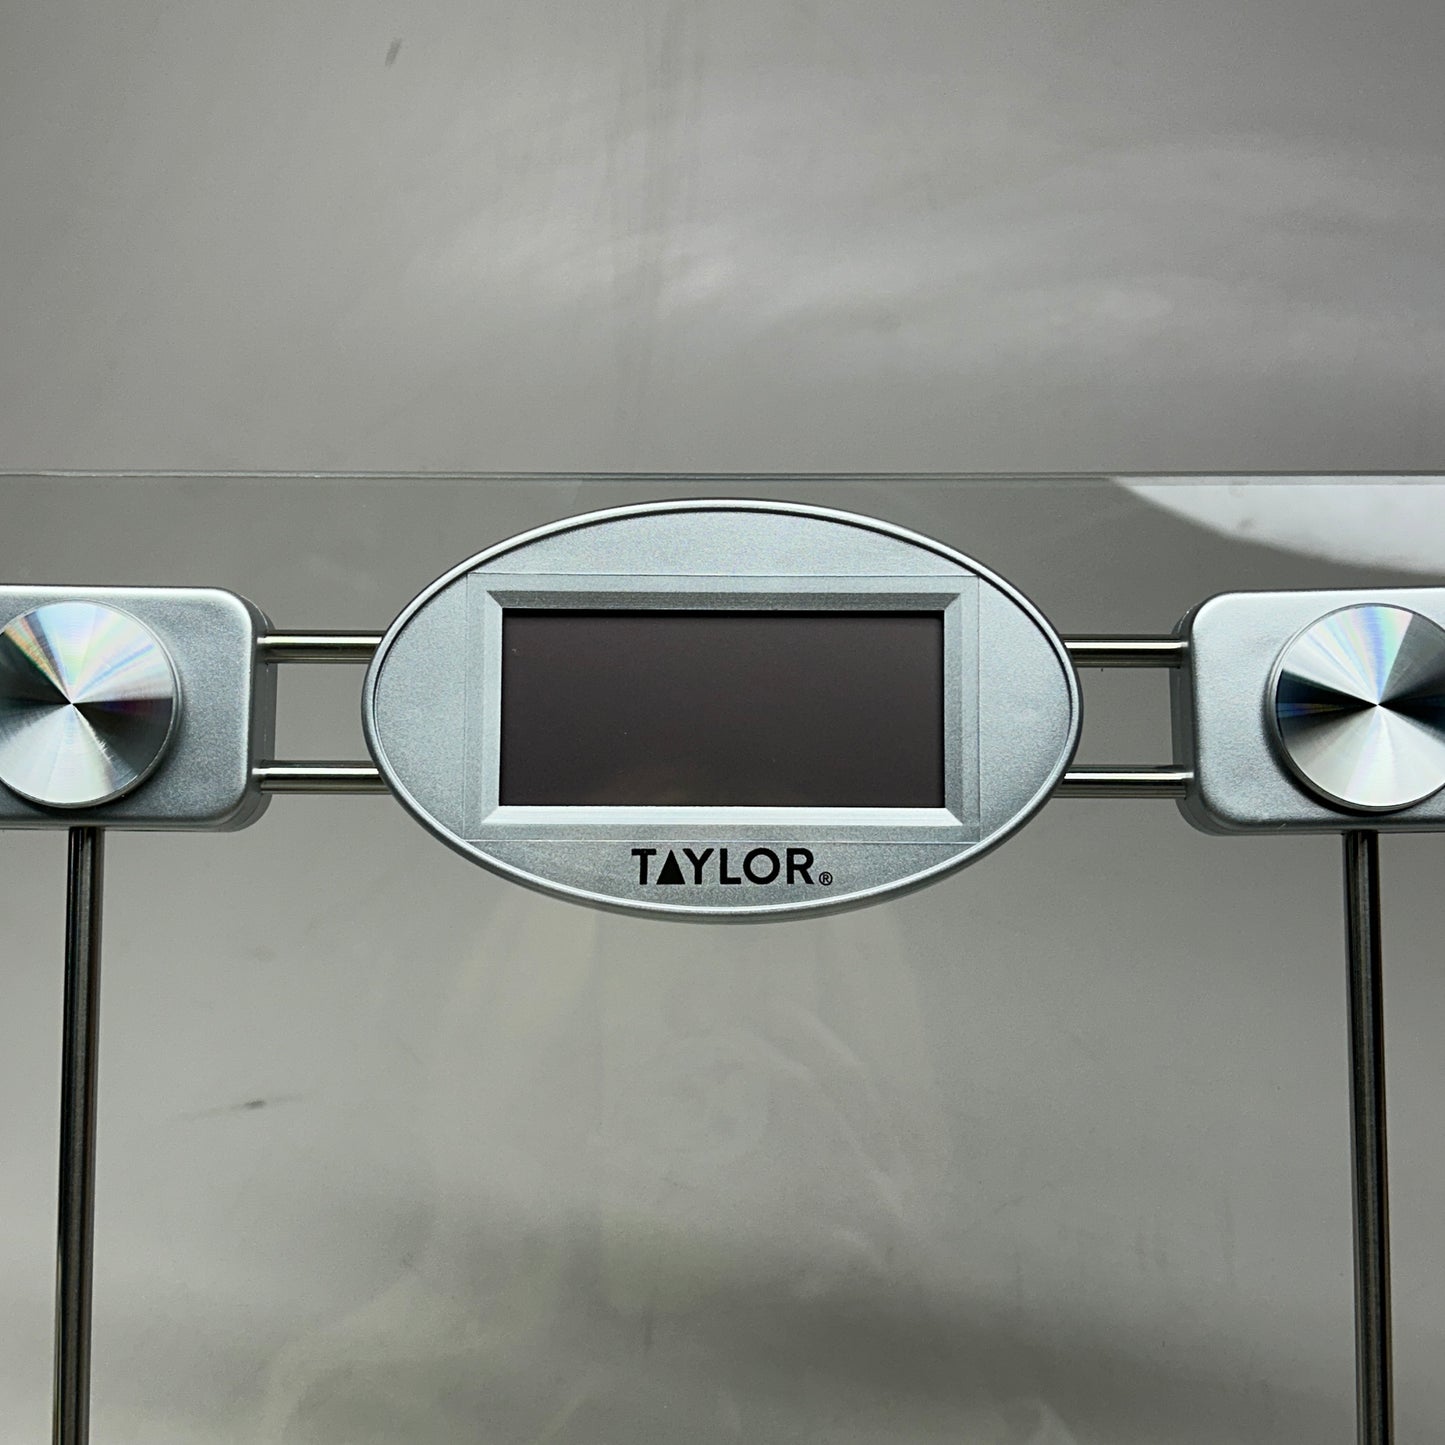 TAYLOR Digital Bathroom Scale with Stainless Steel Frame 75274192 (New)